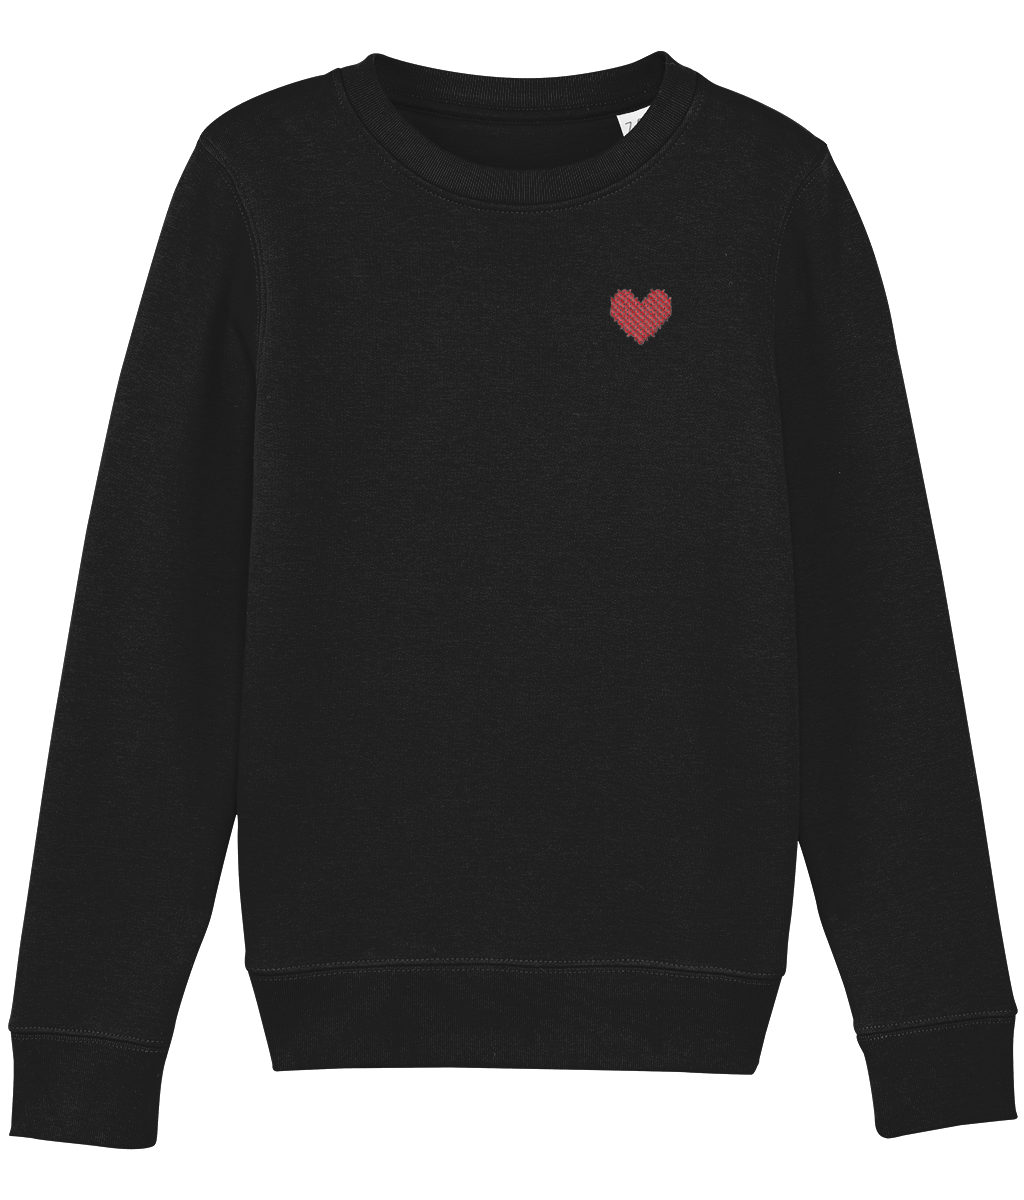 Made with Love Kids Red Heart Sweater